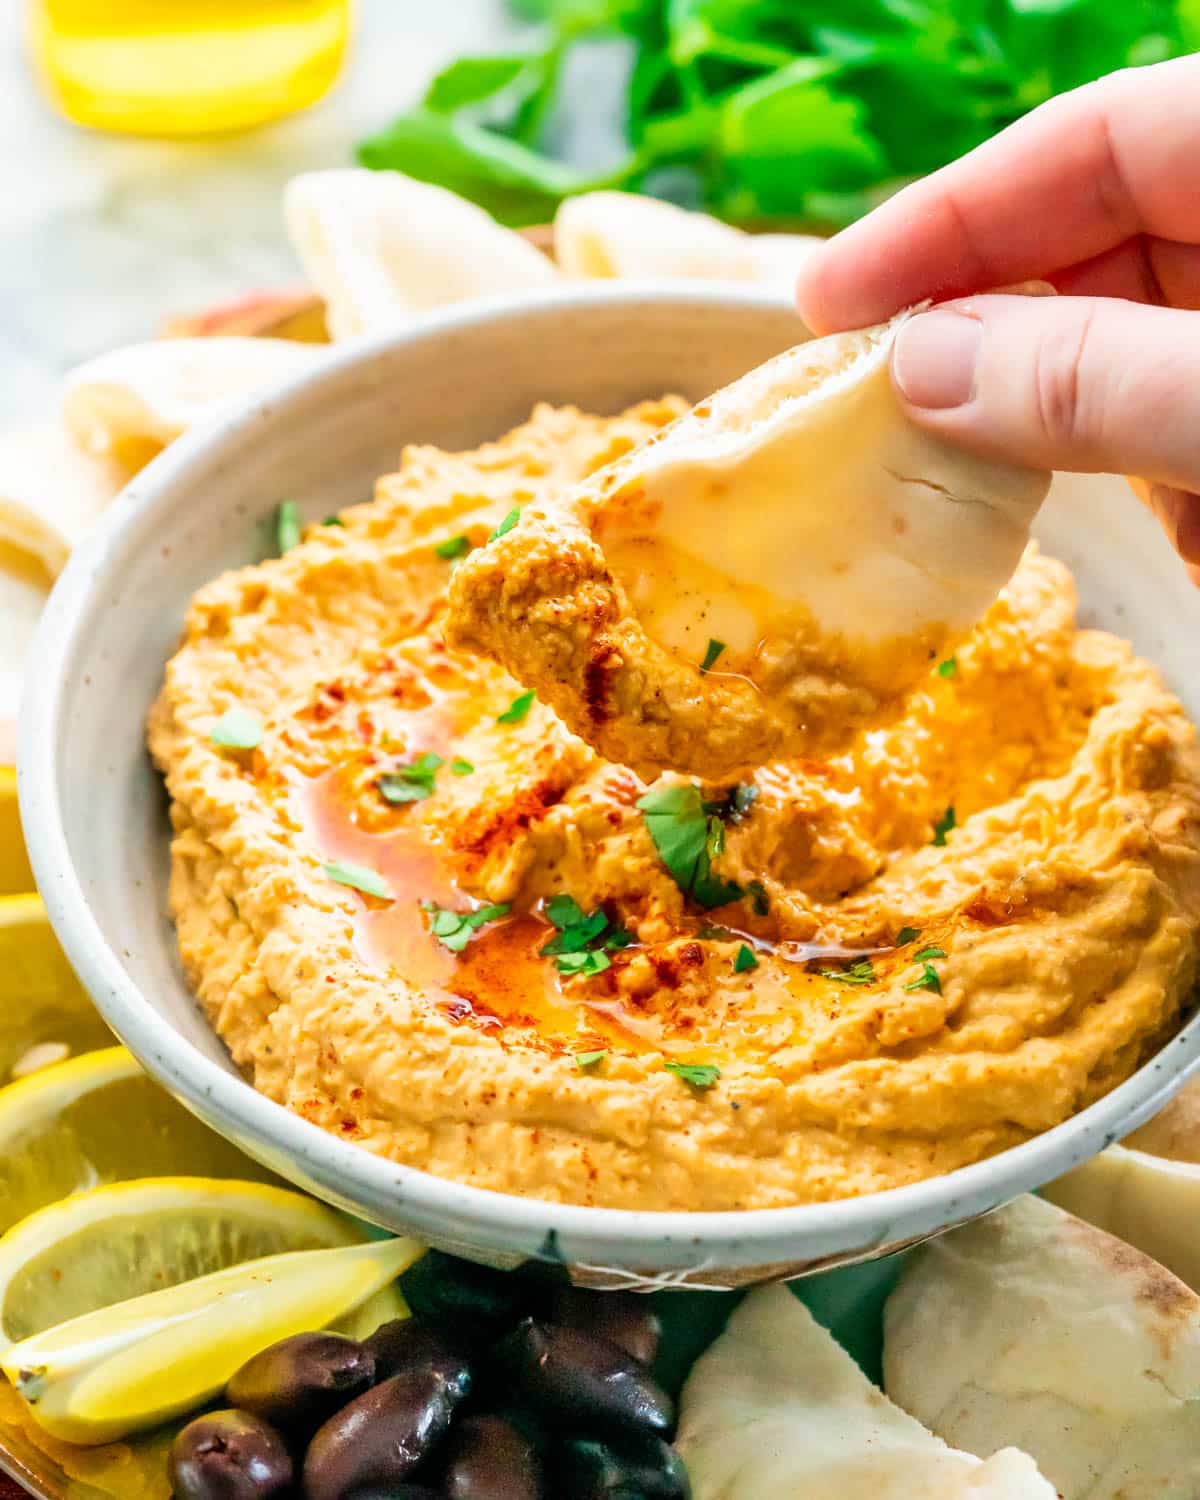 a hand scooping out some hummus with a pita chip